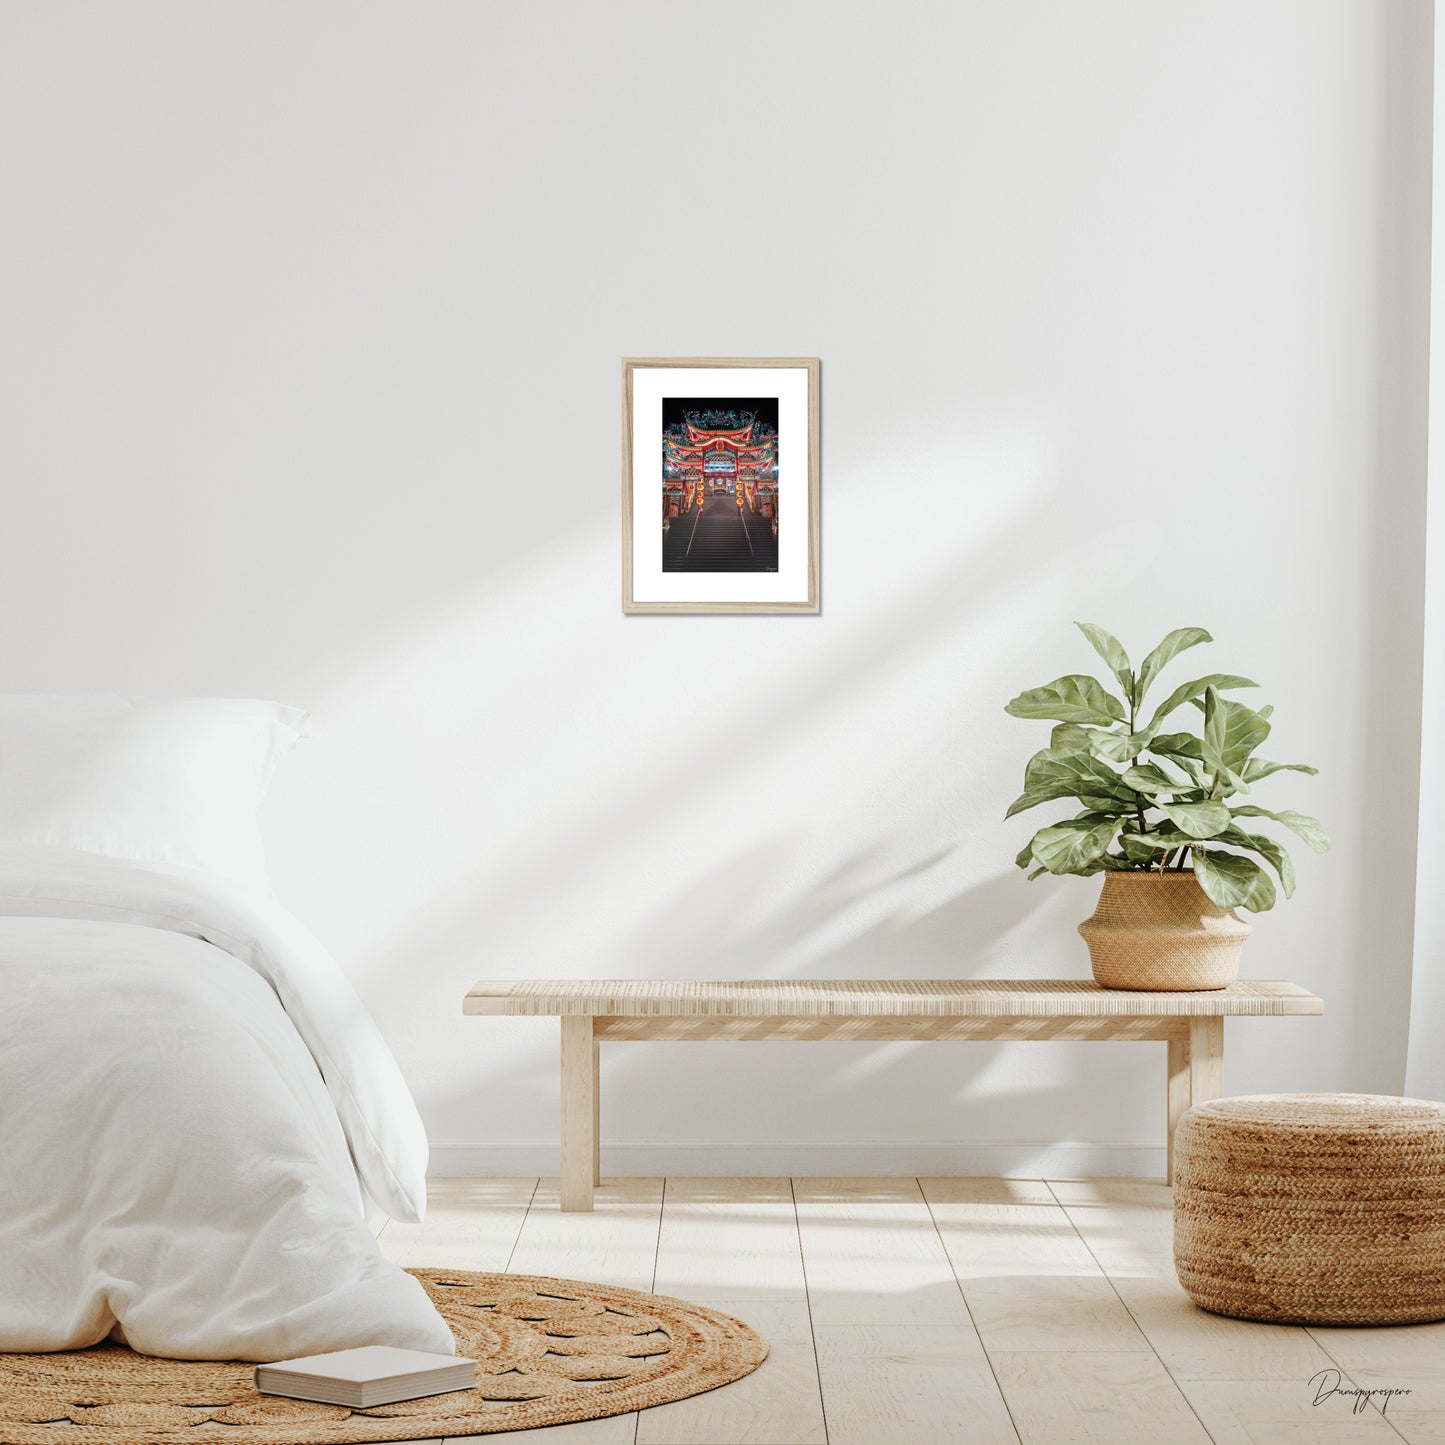 Mockup of wall art showing a small beige wooden frame that is hanging on the wall of a bedroom and contains a photo of a very impressive Taoist temple during the night in Taipei Taiwan